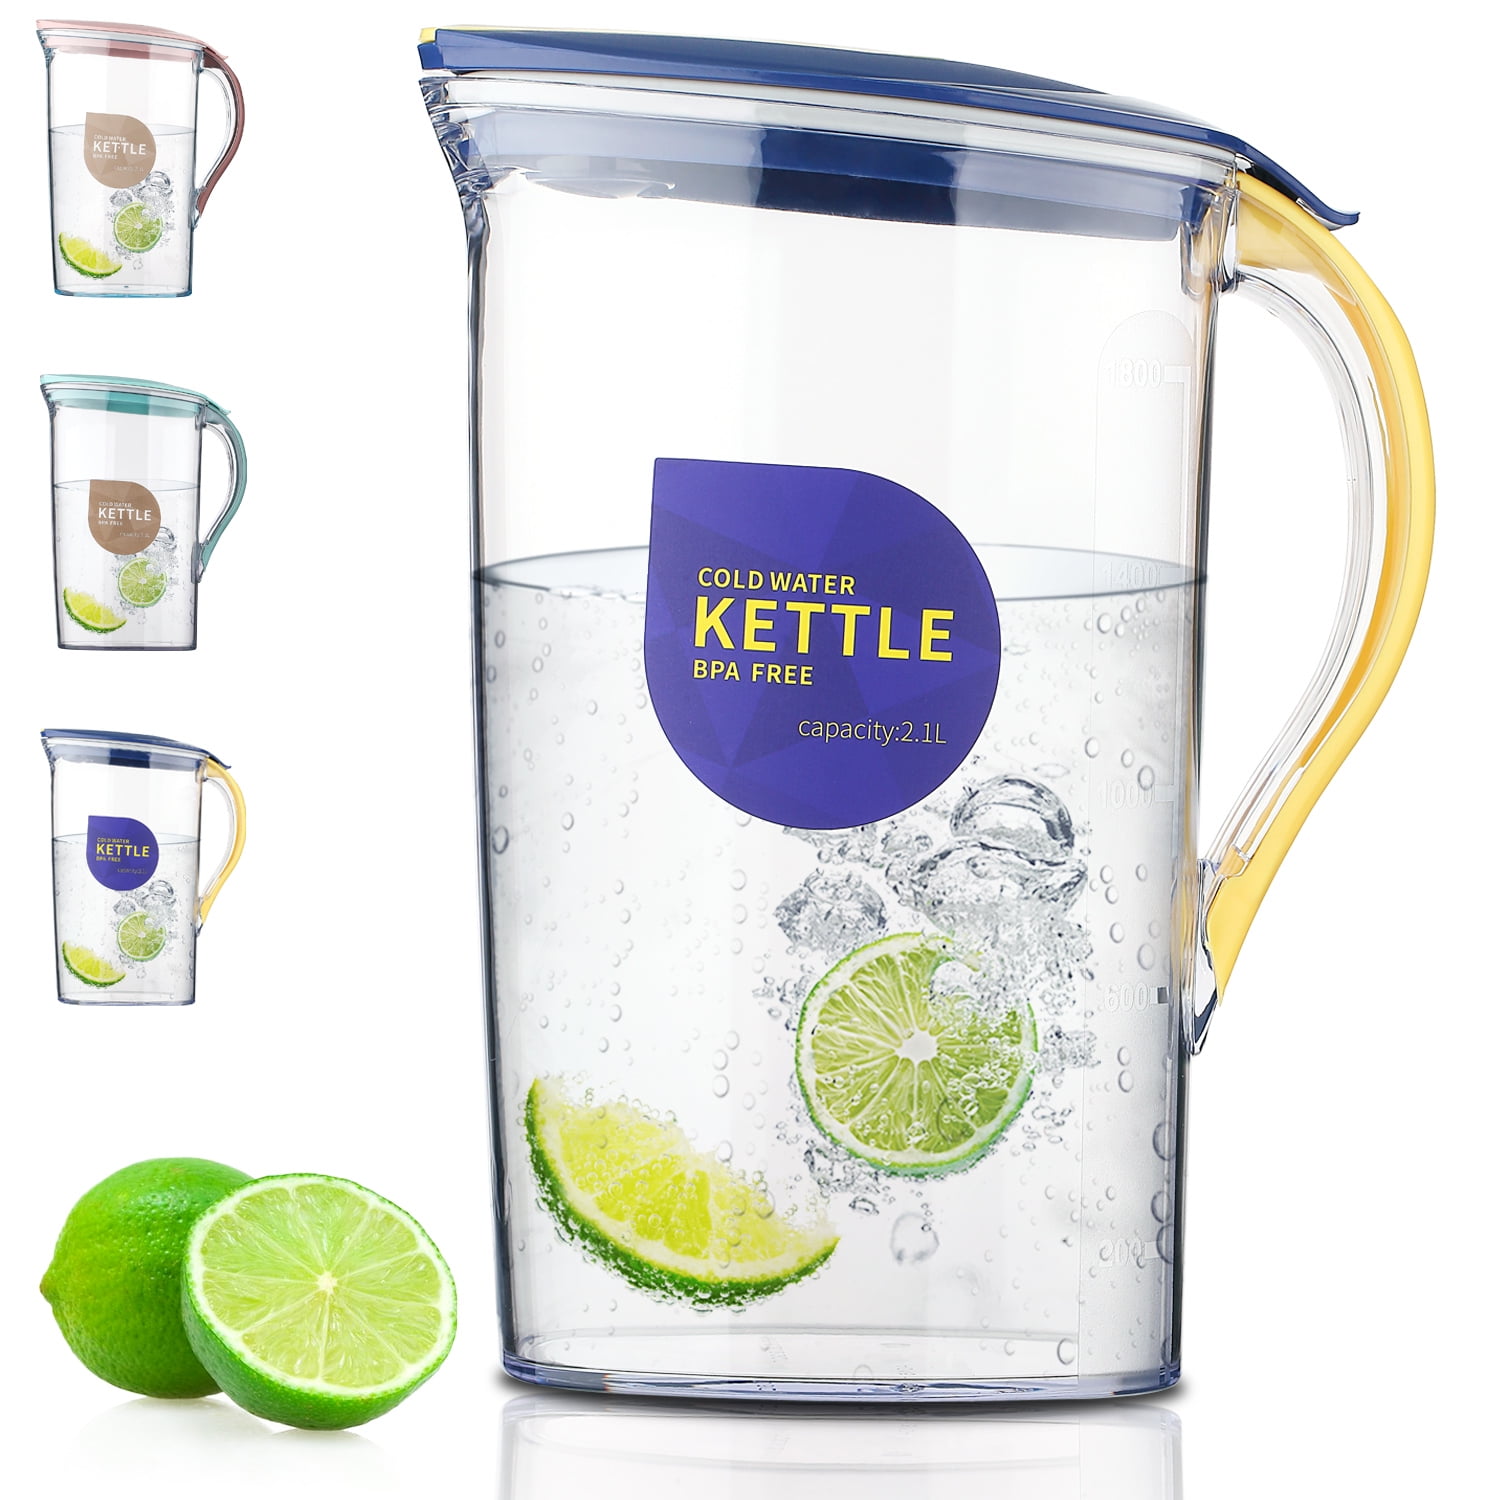 IMIKEYA Small Glass Pitcher Plastic Pitcher with Lid Cold Water Kettle  Juice Pitcher Water Beverage Pitcher for Ice Tea Drinks Home Party Supplies